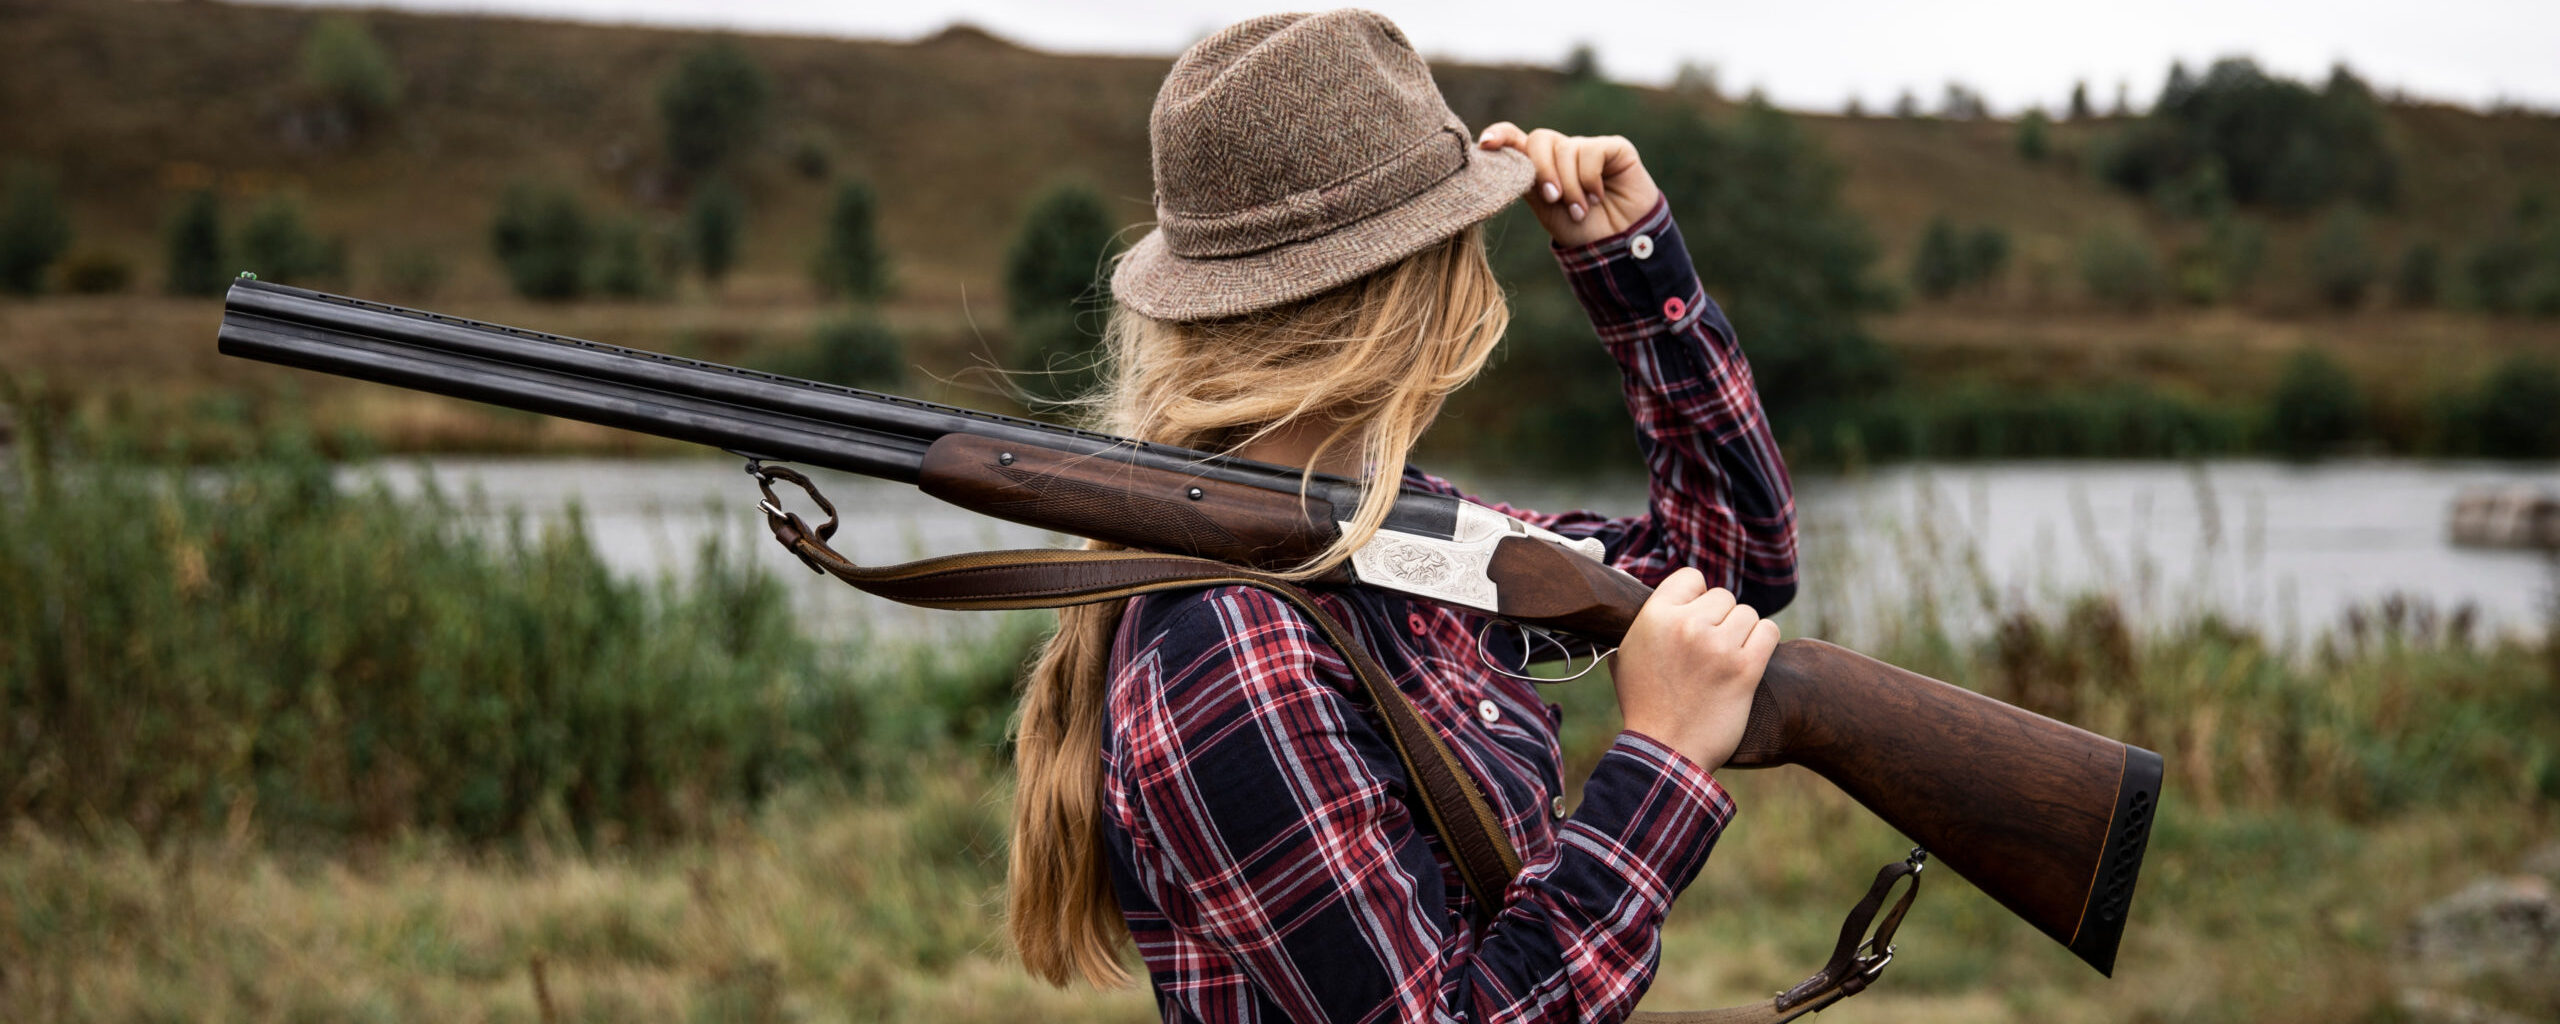 6 Best Guns for Women Who Live Alone